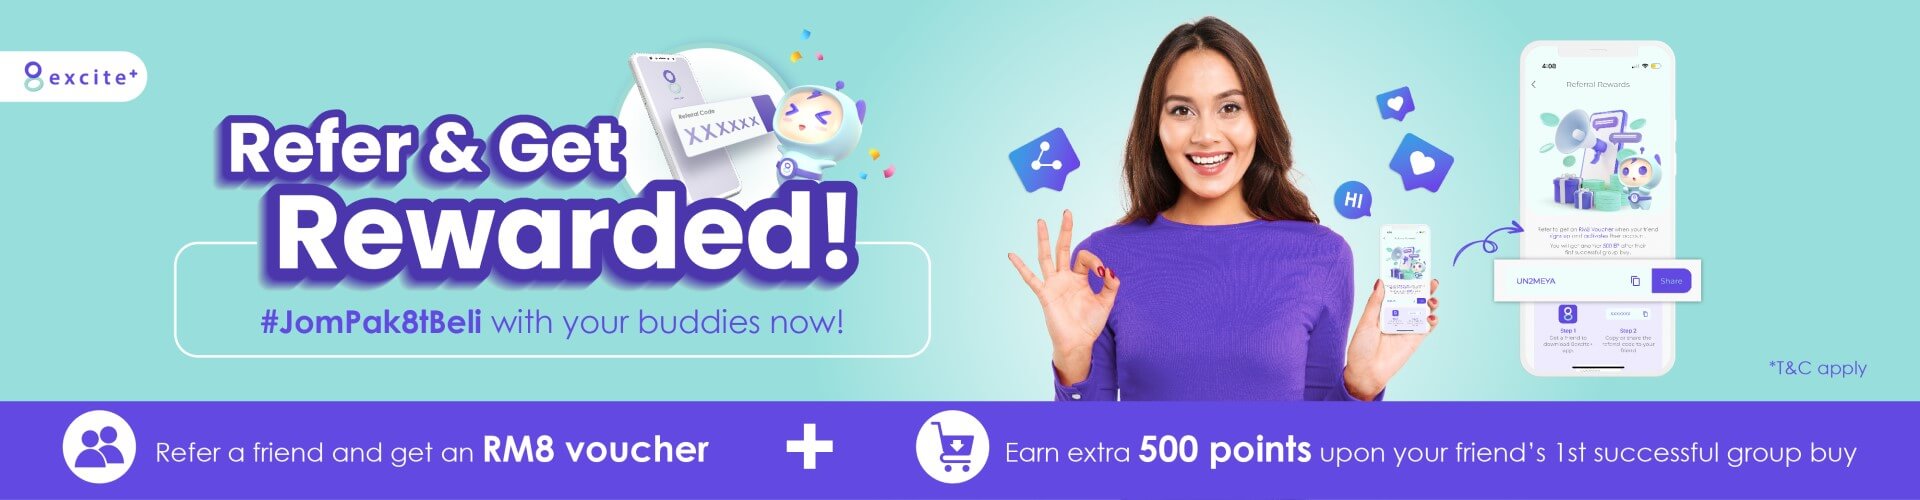 Refer & earn extra vouchers and points